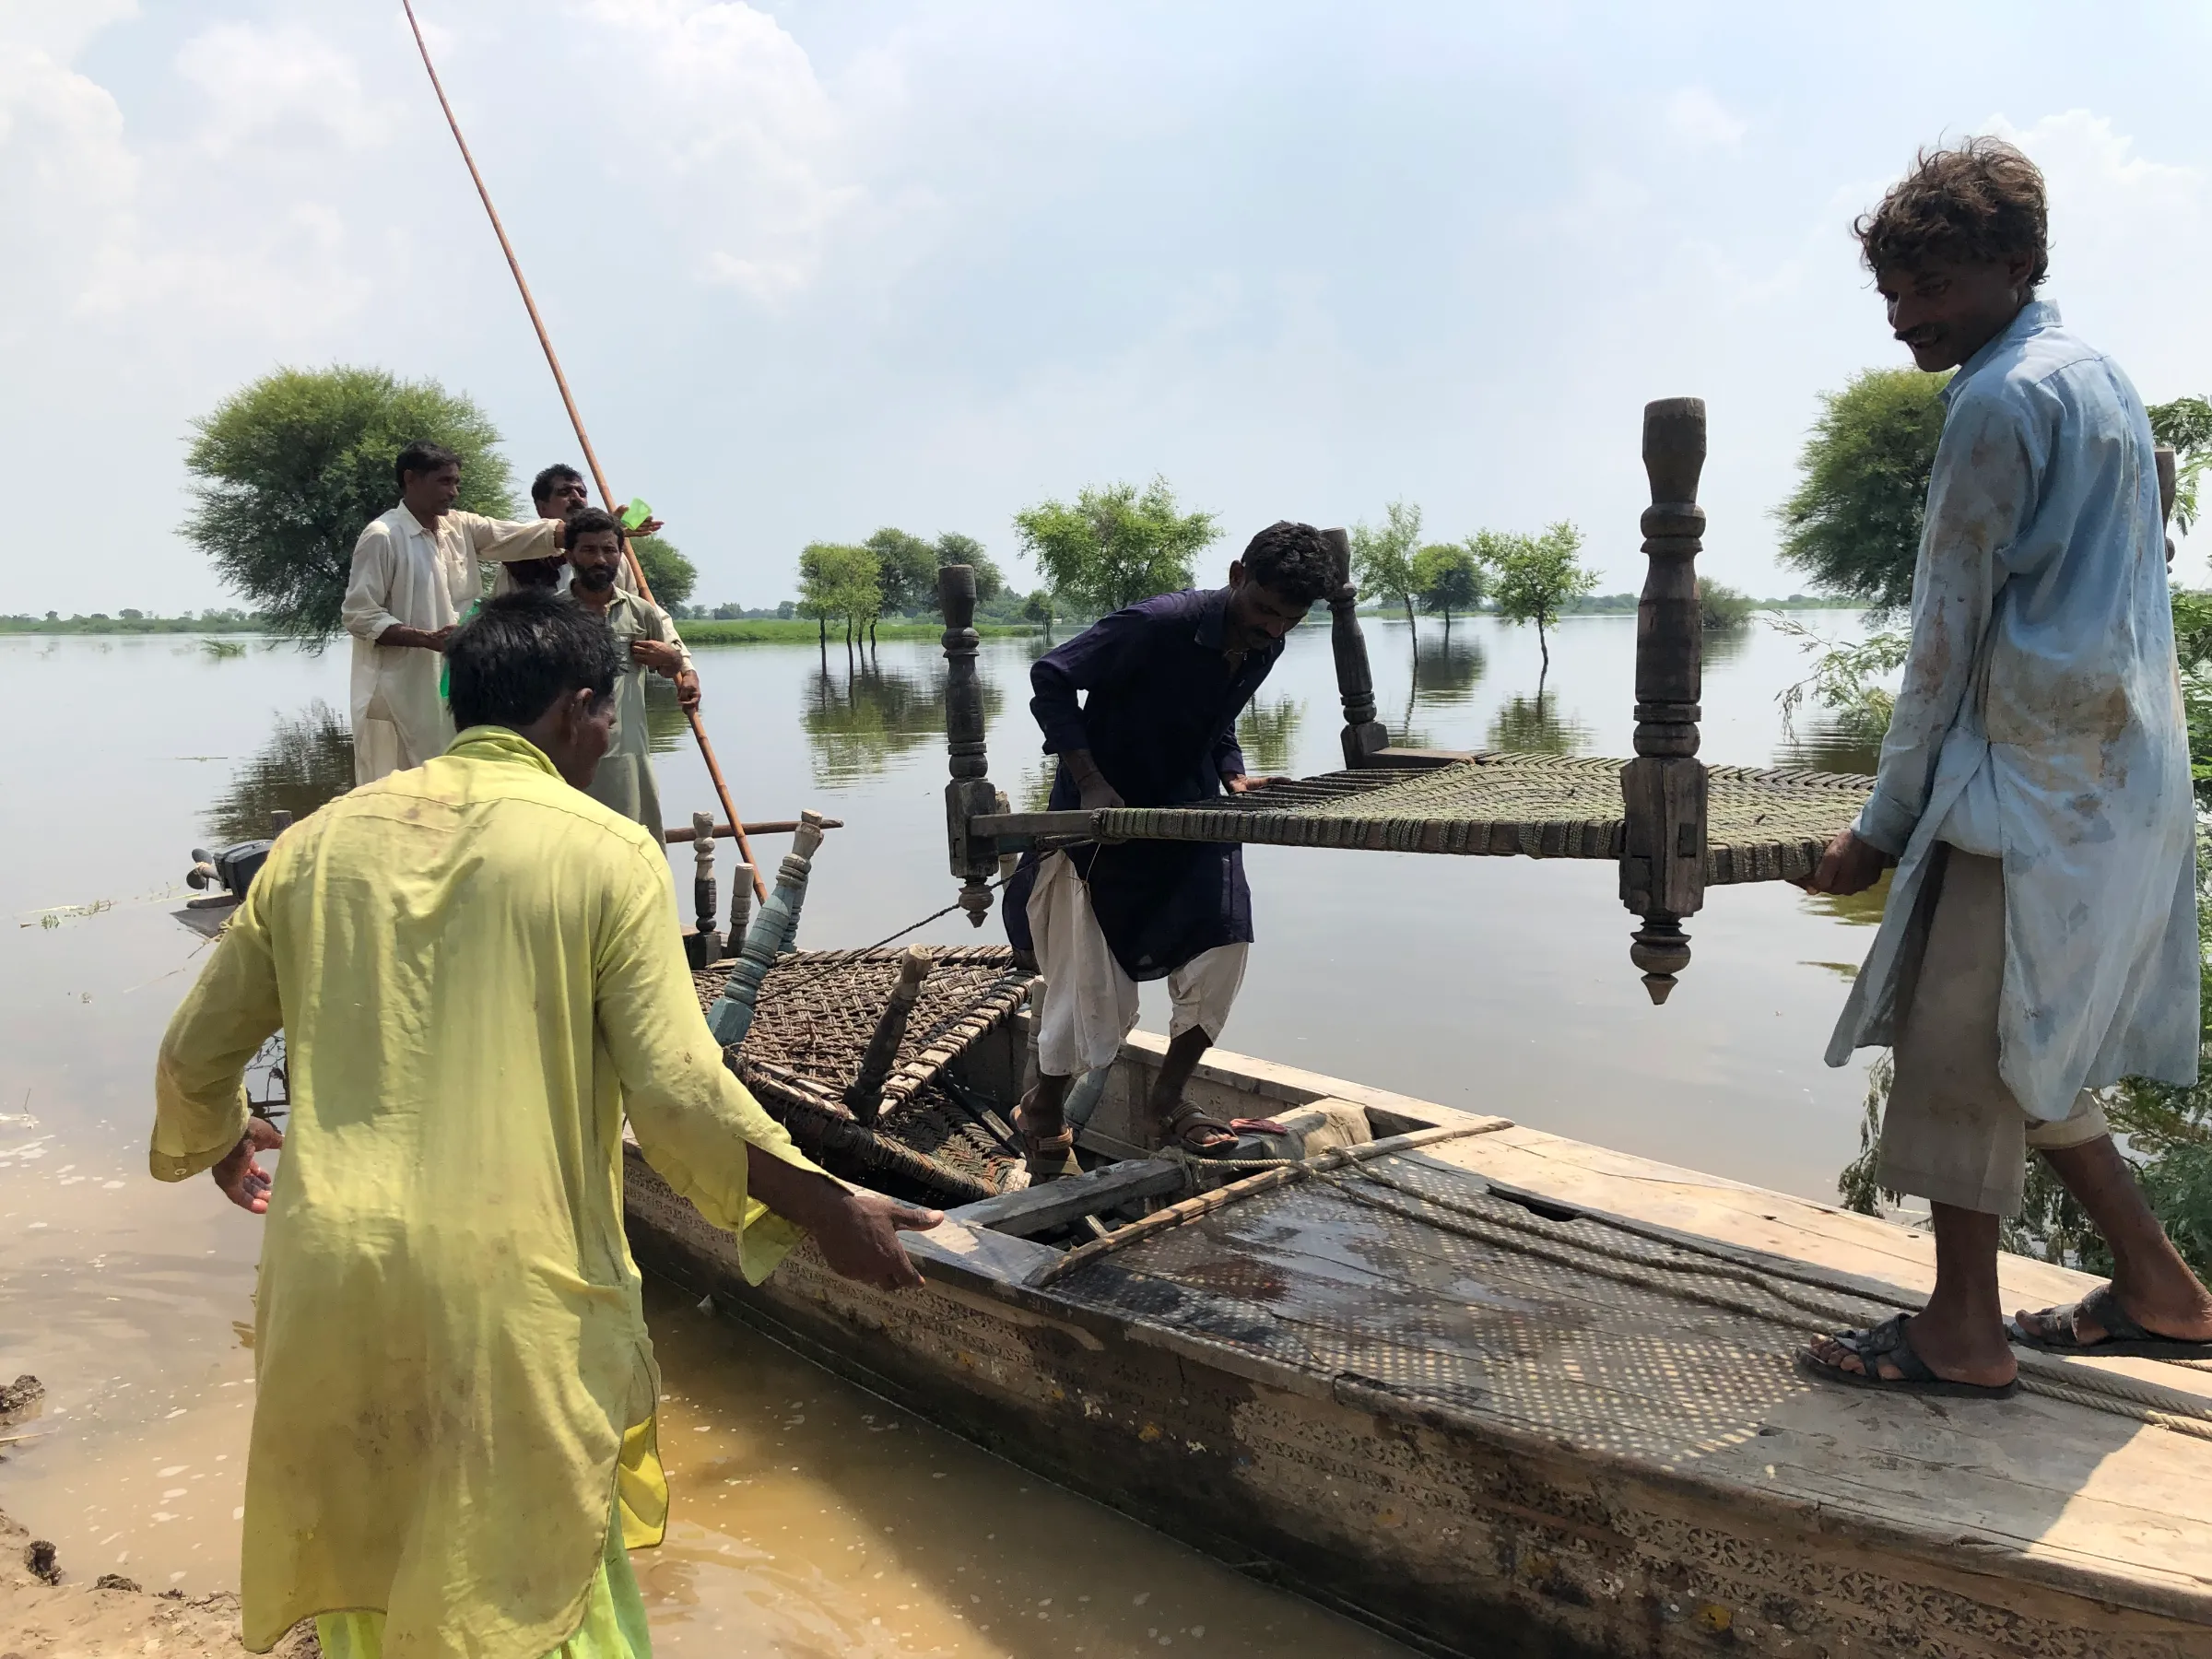 Flood-affected displaced people retrieve charpais (rope beds) from their submerged homes in the village of Jerrar Bheel, in Pakistan, September 10, 2022. Thomson Reuters Foundation/Zofeen Ebrahim